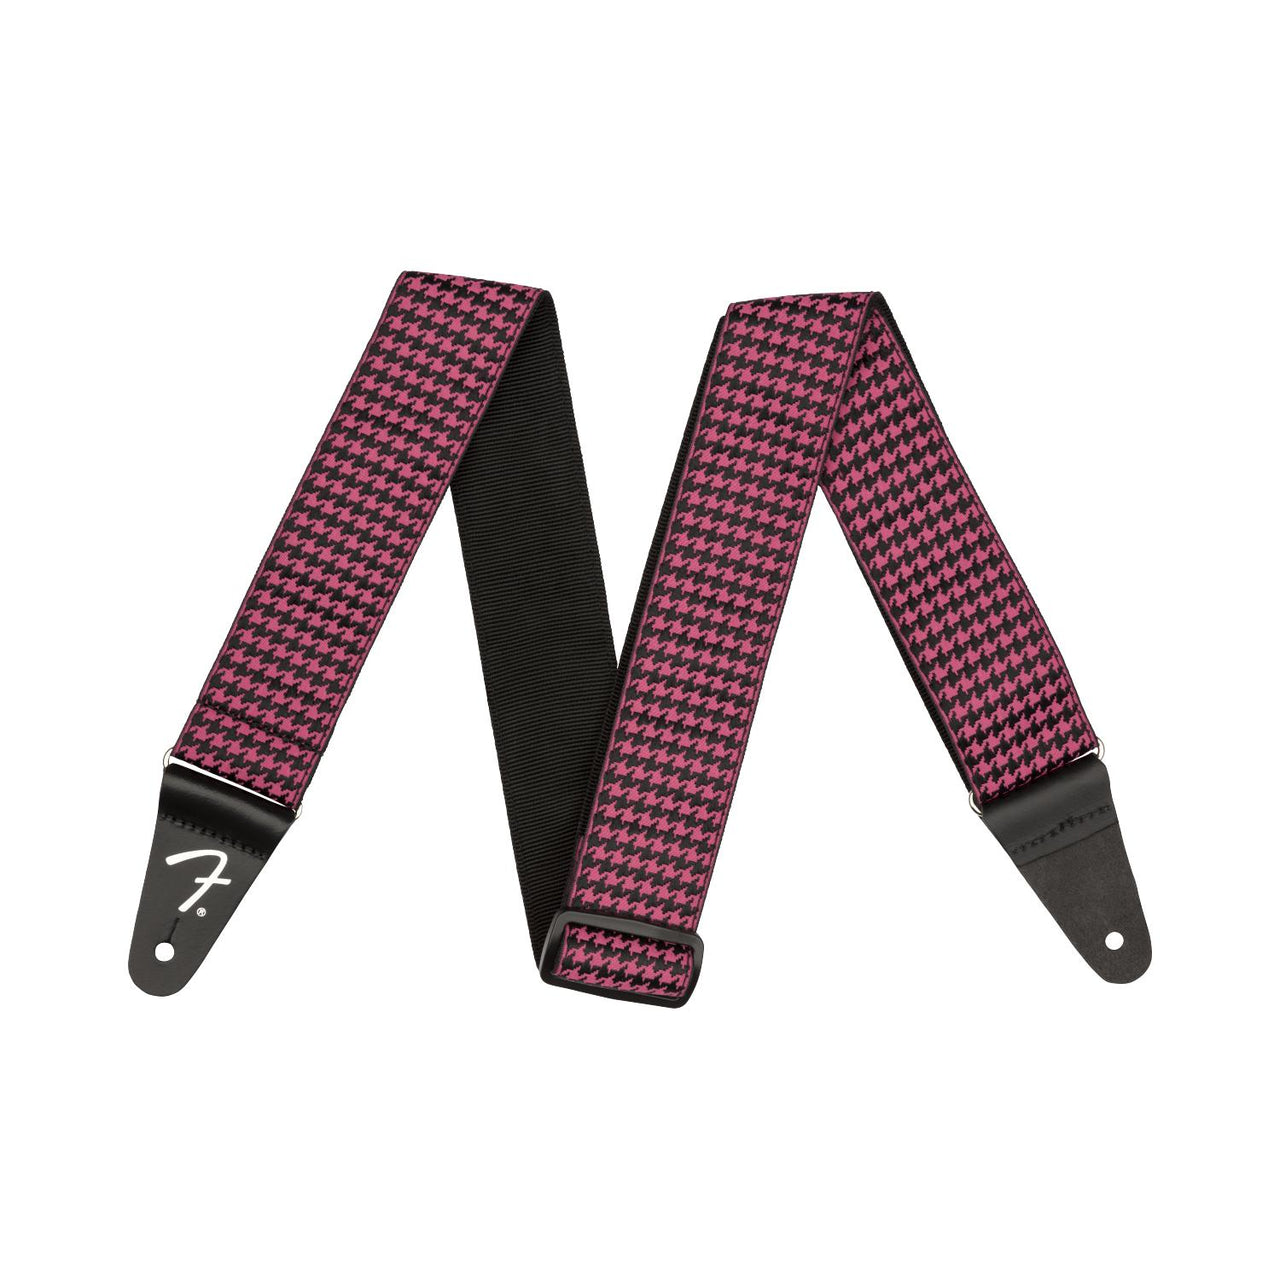 thaly fender p/guitarra houndstooth pink, 0990709056